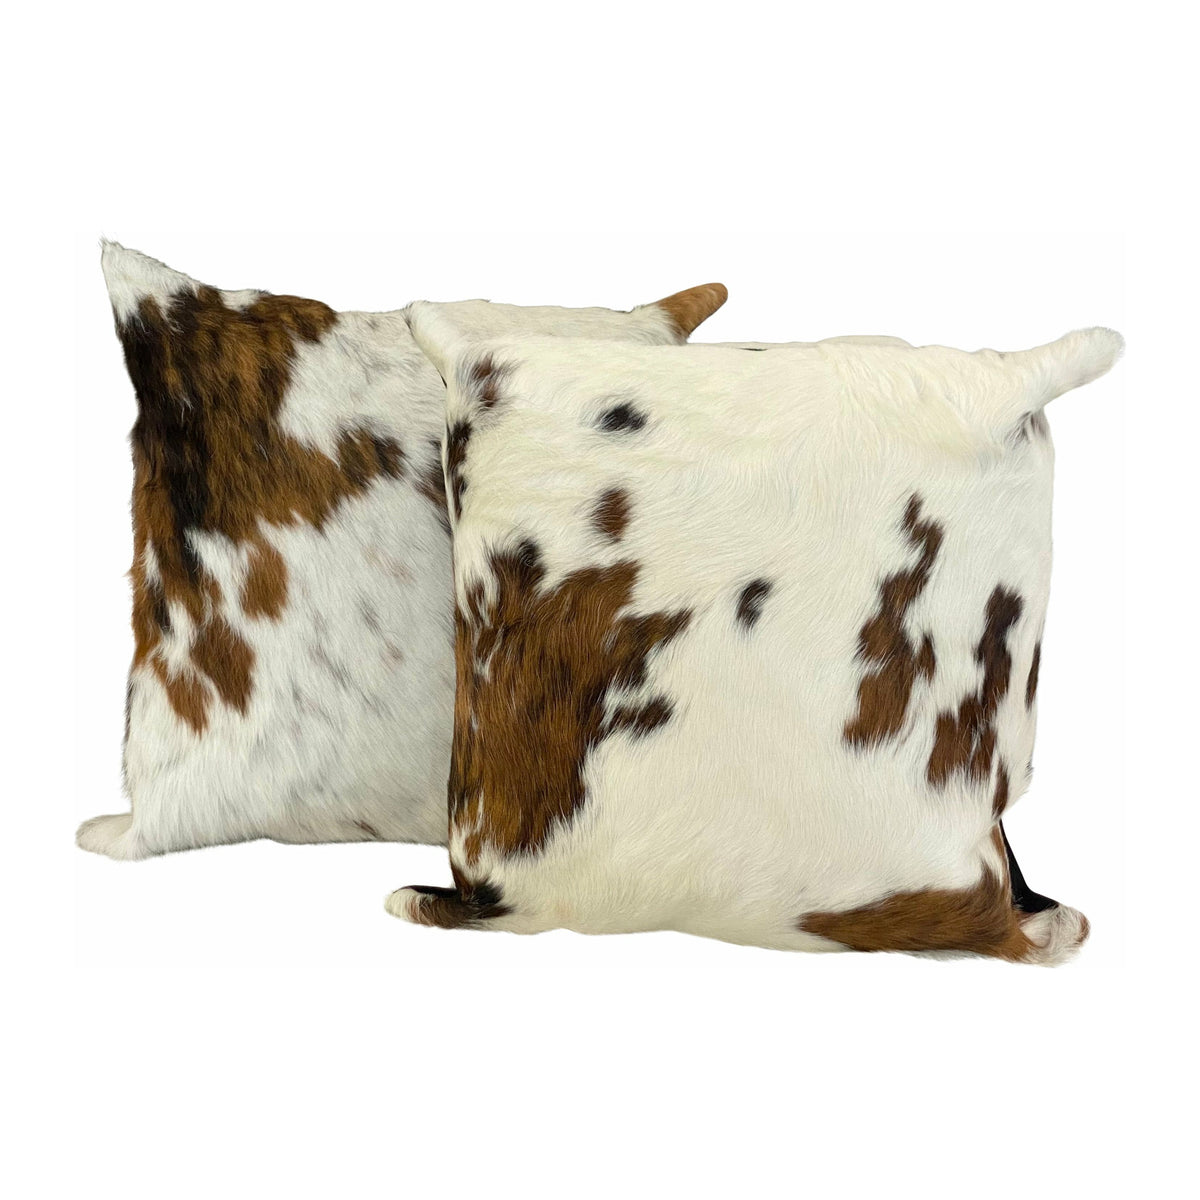 Pair of Cow Hide Pillows - colletteconsignment.com